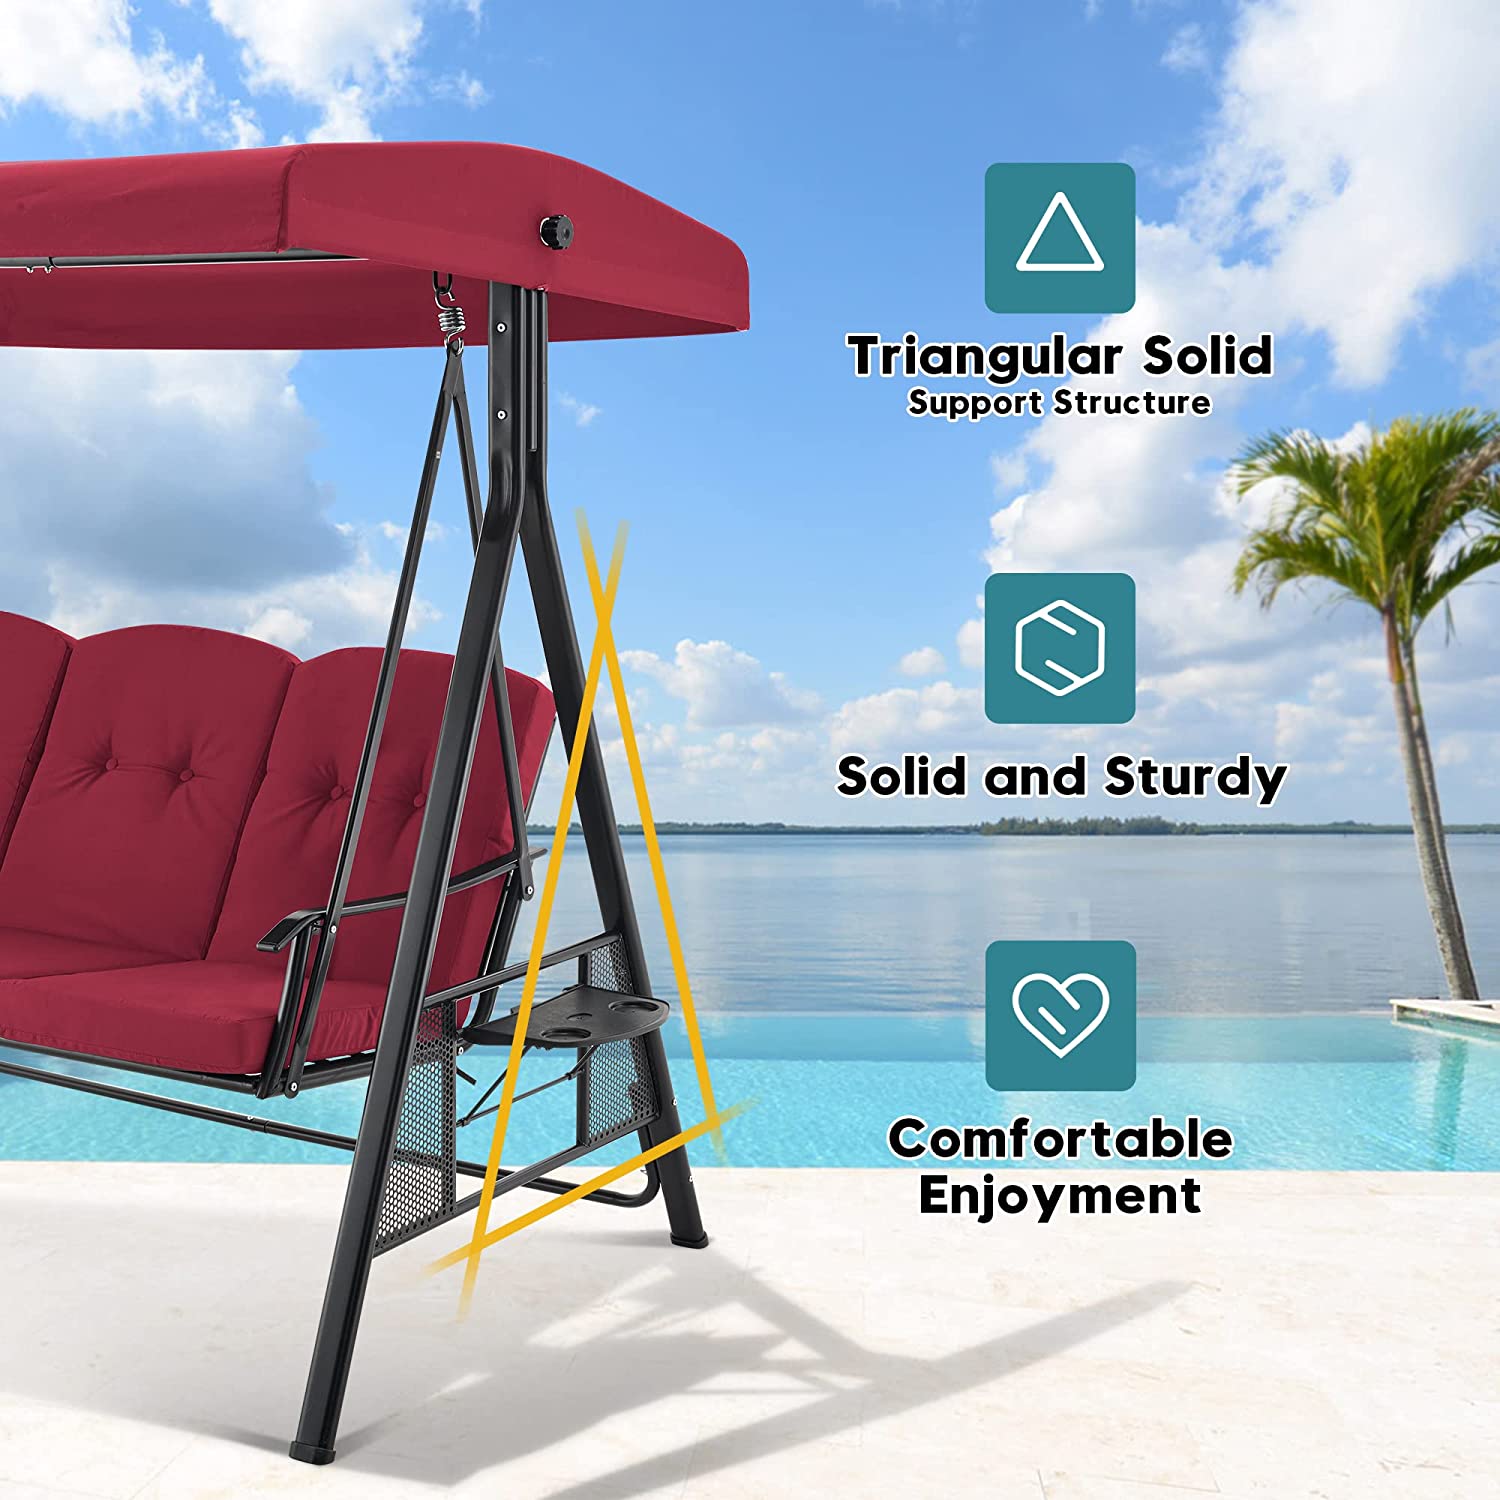 Mcombo 3 Seat Patio Swings with Canopy, Outdoor Porch Swing Chair with Stand, Adjustable Canopy Swing Sets for Backyard, Poolside, Balcony 4092(Burgundy) - image 5 of 5